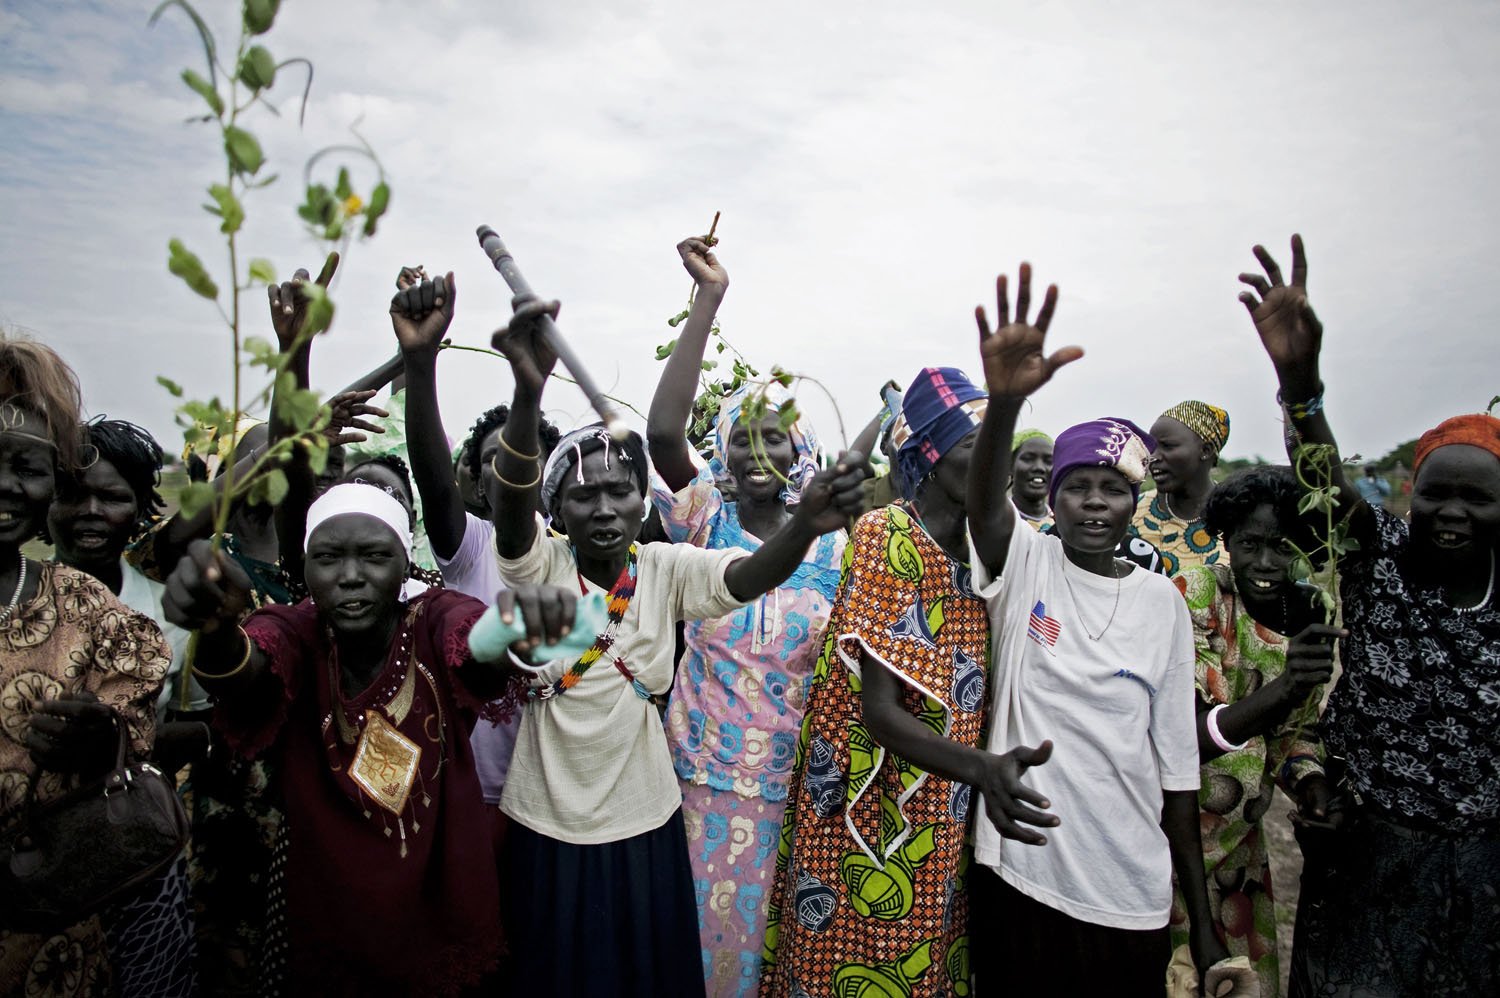  Nuer tribeswomen in the remote town of Akobo, near the border with Ethiopia. Akobo has been devastated by intertribal fighting since the end of the civil war in 2005. Nearly 1,000 people were killed in fighting there in 2009 alone. 